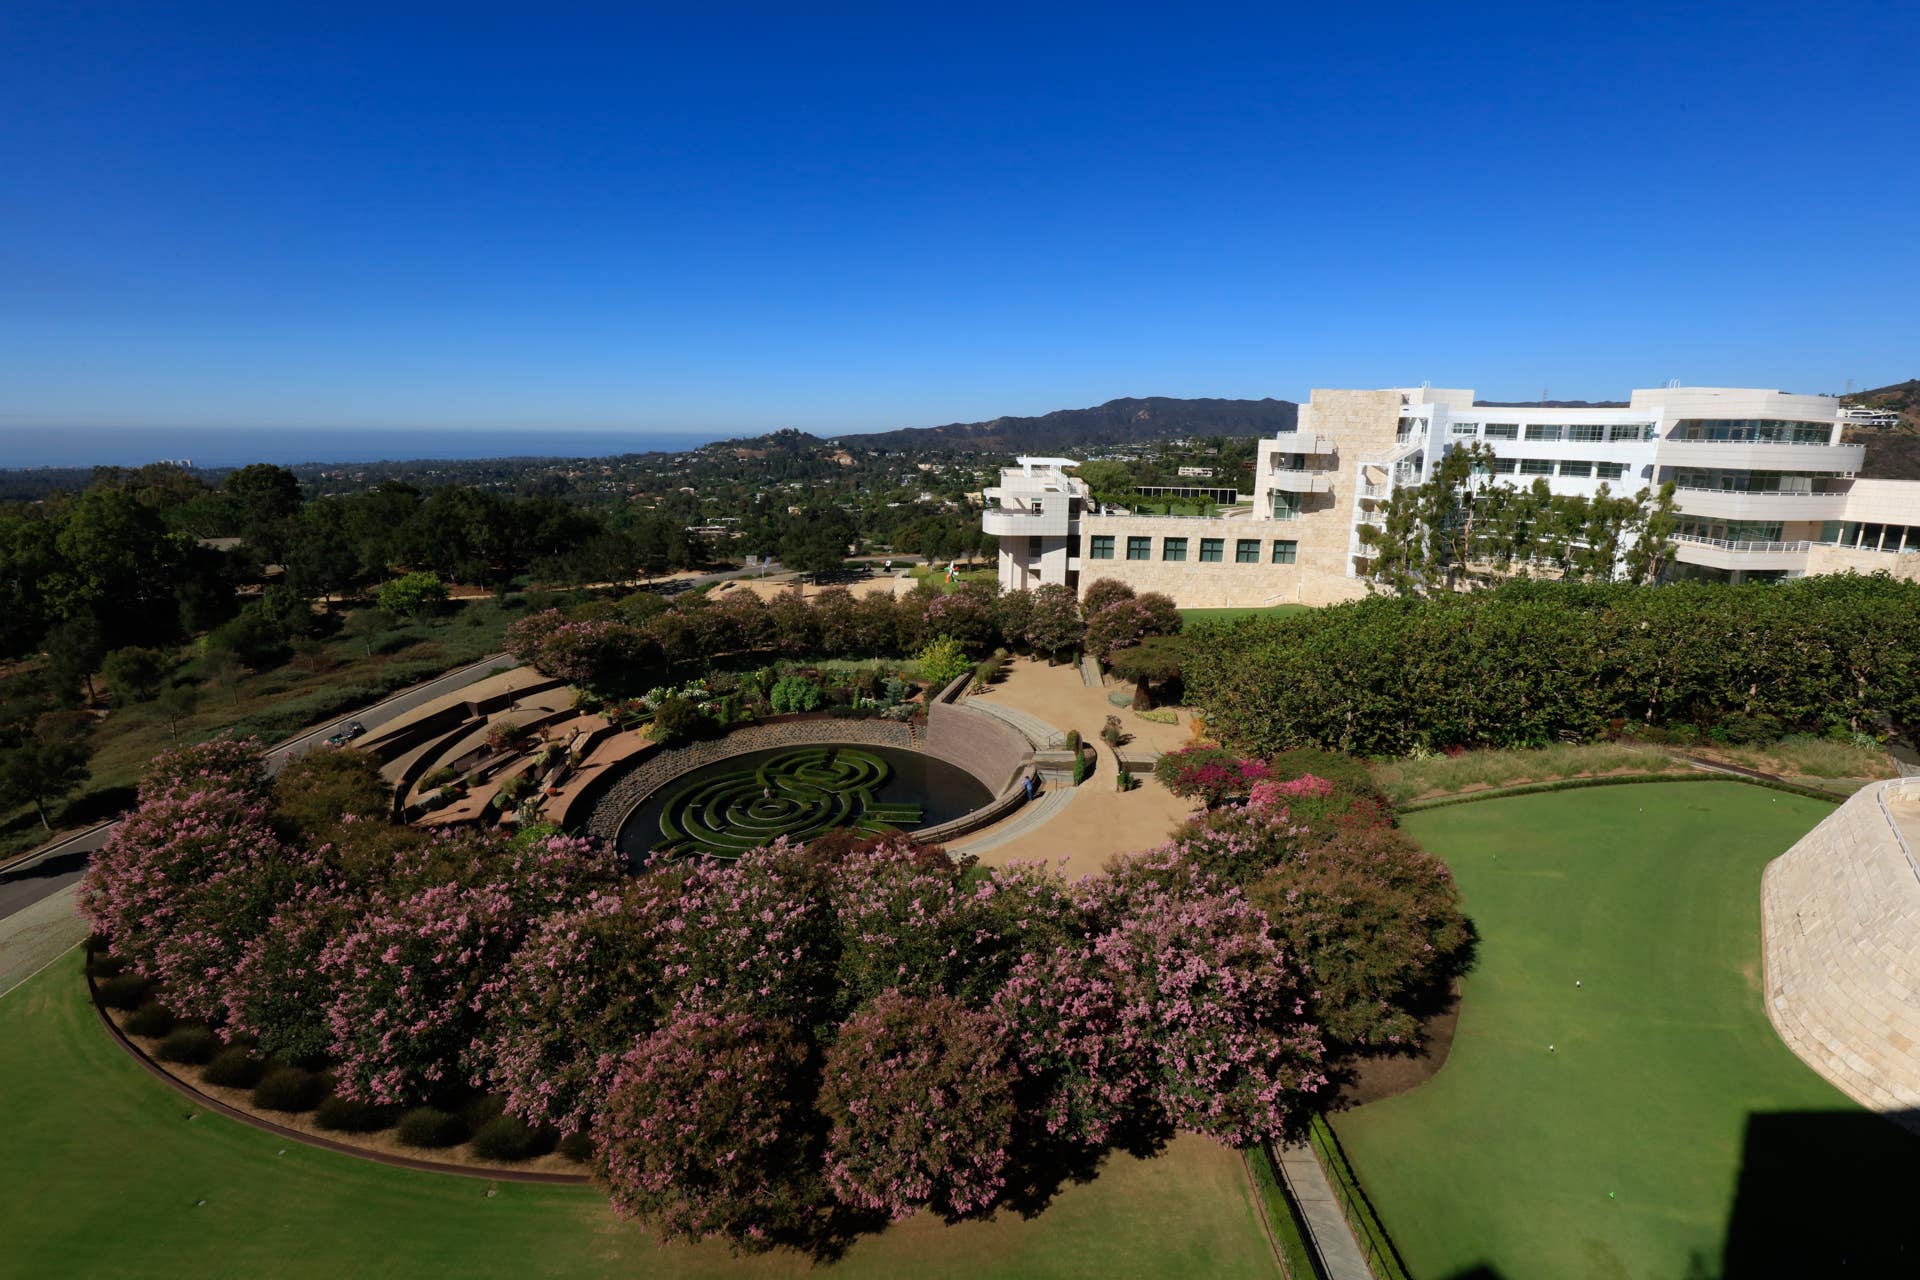 Views of the Central Garden and Pacific Ocean at the Getty Center   |  Photo: Yuri Hasegawa